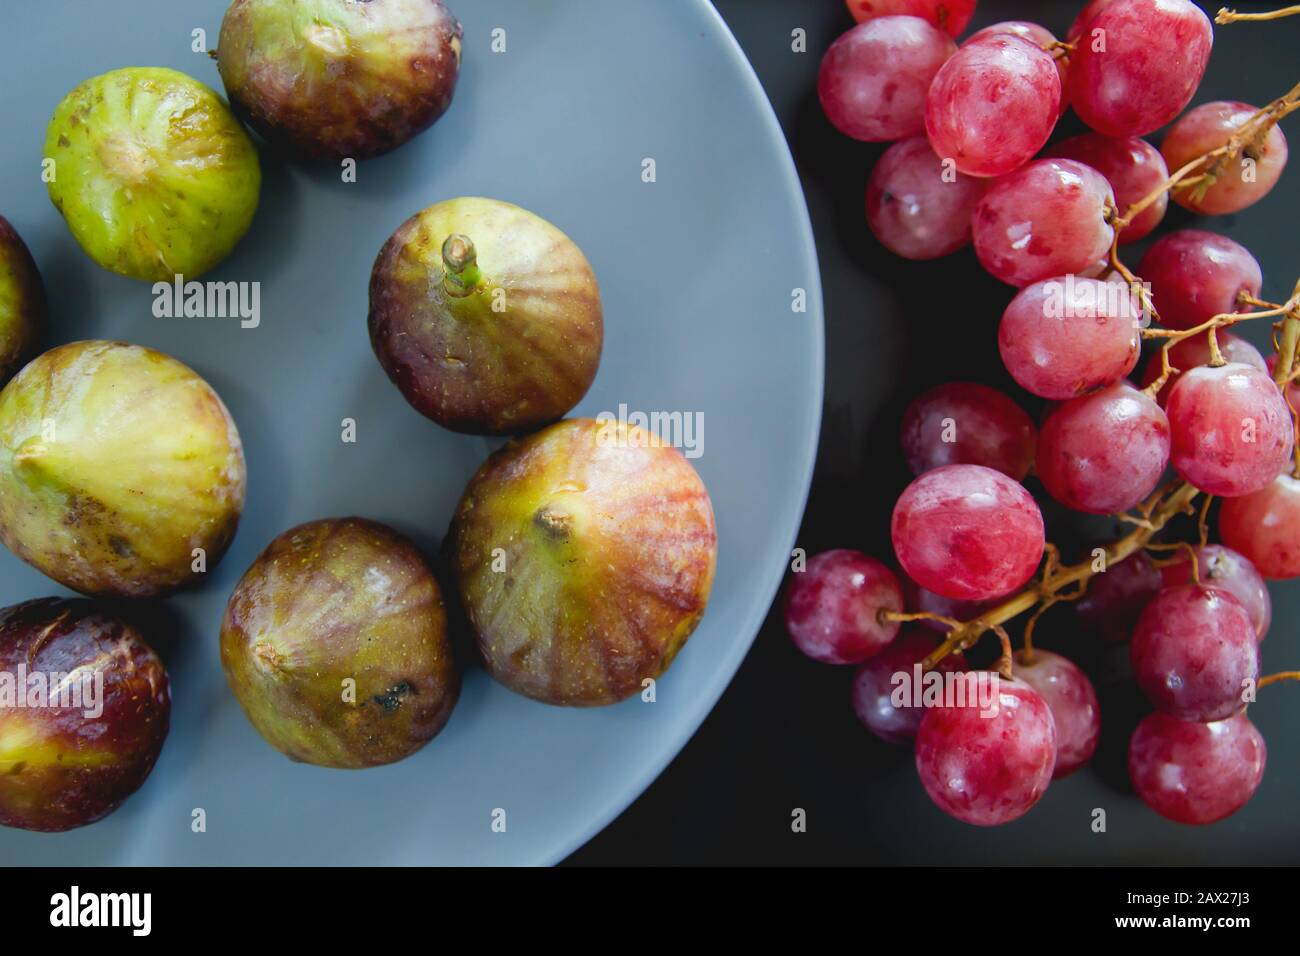 Fresh grapes and figs on the kitchen table Stock Photo